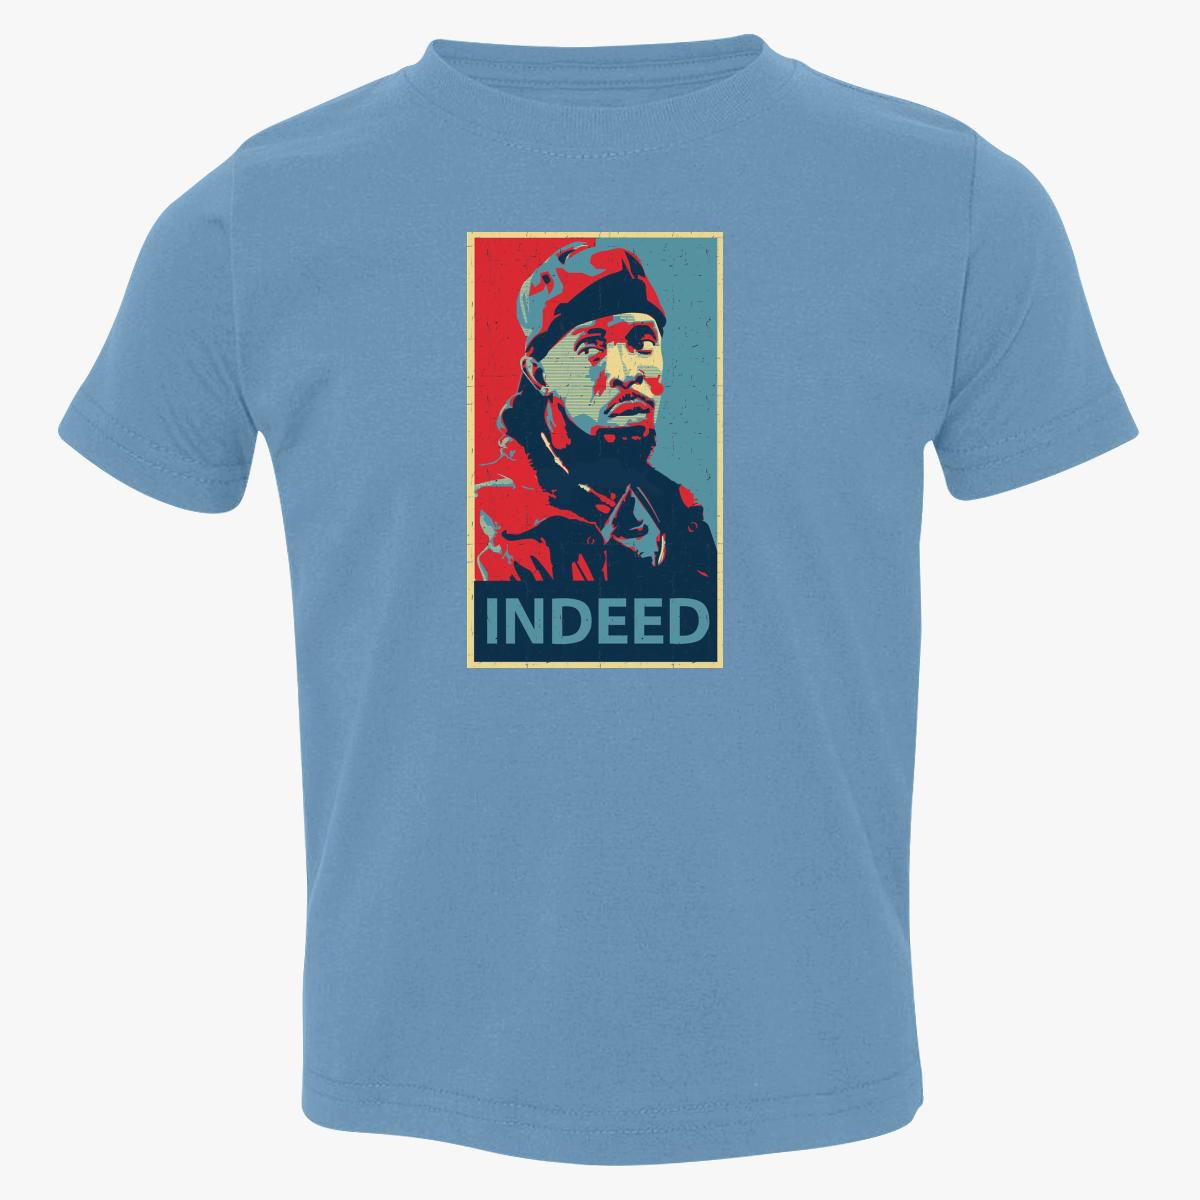 THE WIRE Omar Little Indeed HBO Drama TV Series T-shirt Cotton 100% USA Size